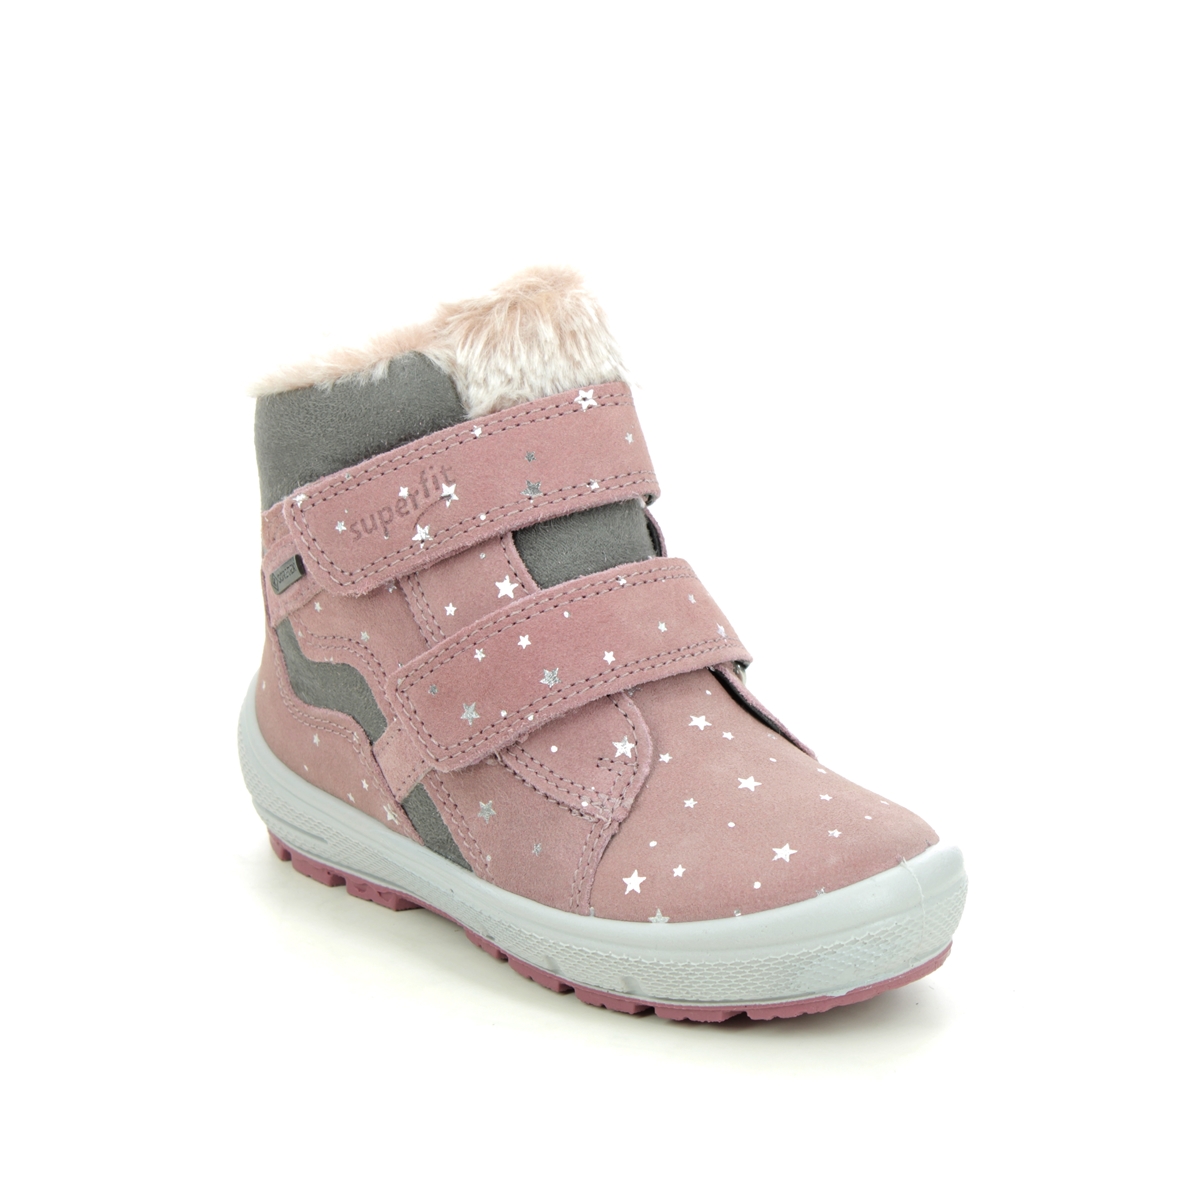 Superfit Groovy Gtx Pink Leather Kids Toddler Girls Boots 1006316-5500 In Size 20 In Plain Pink Leather